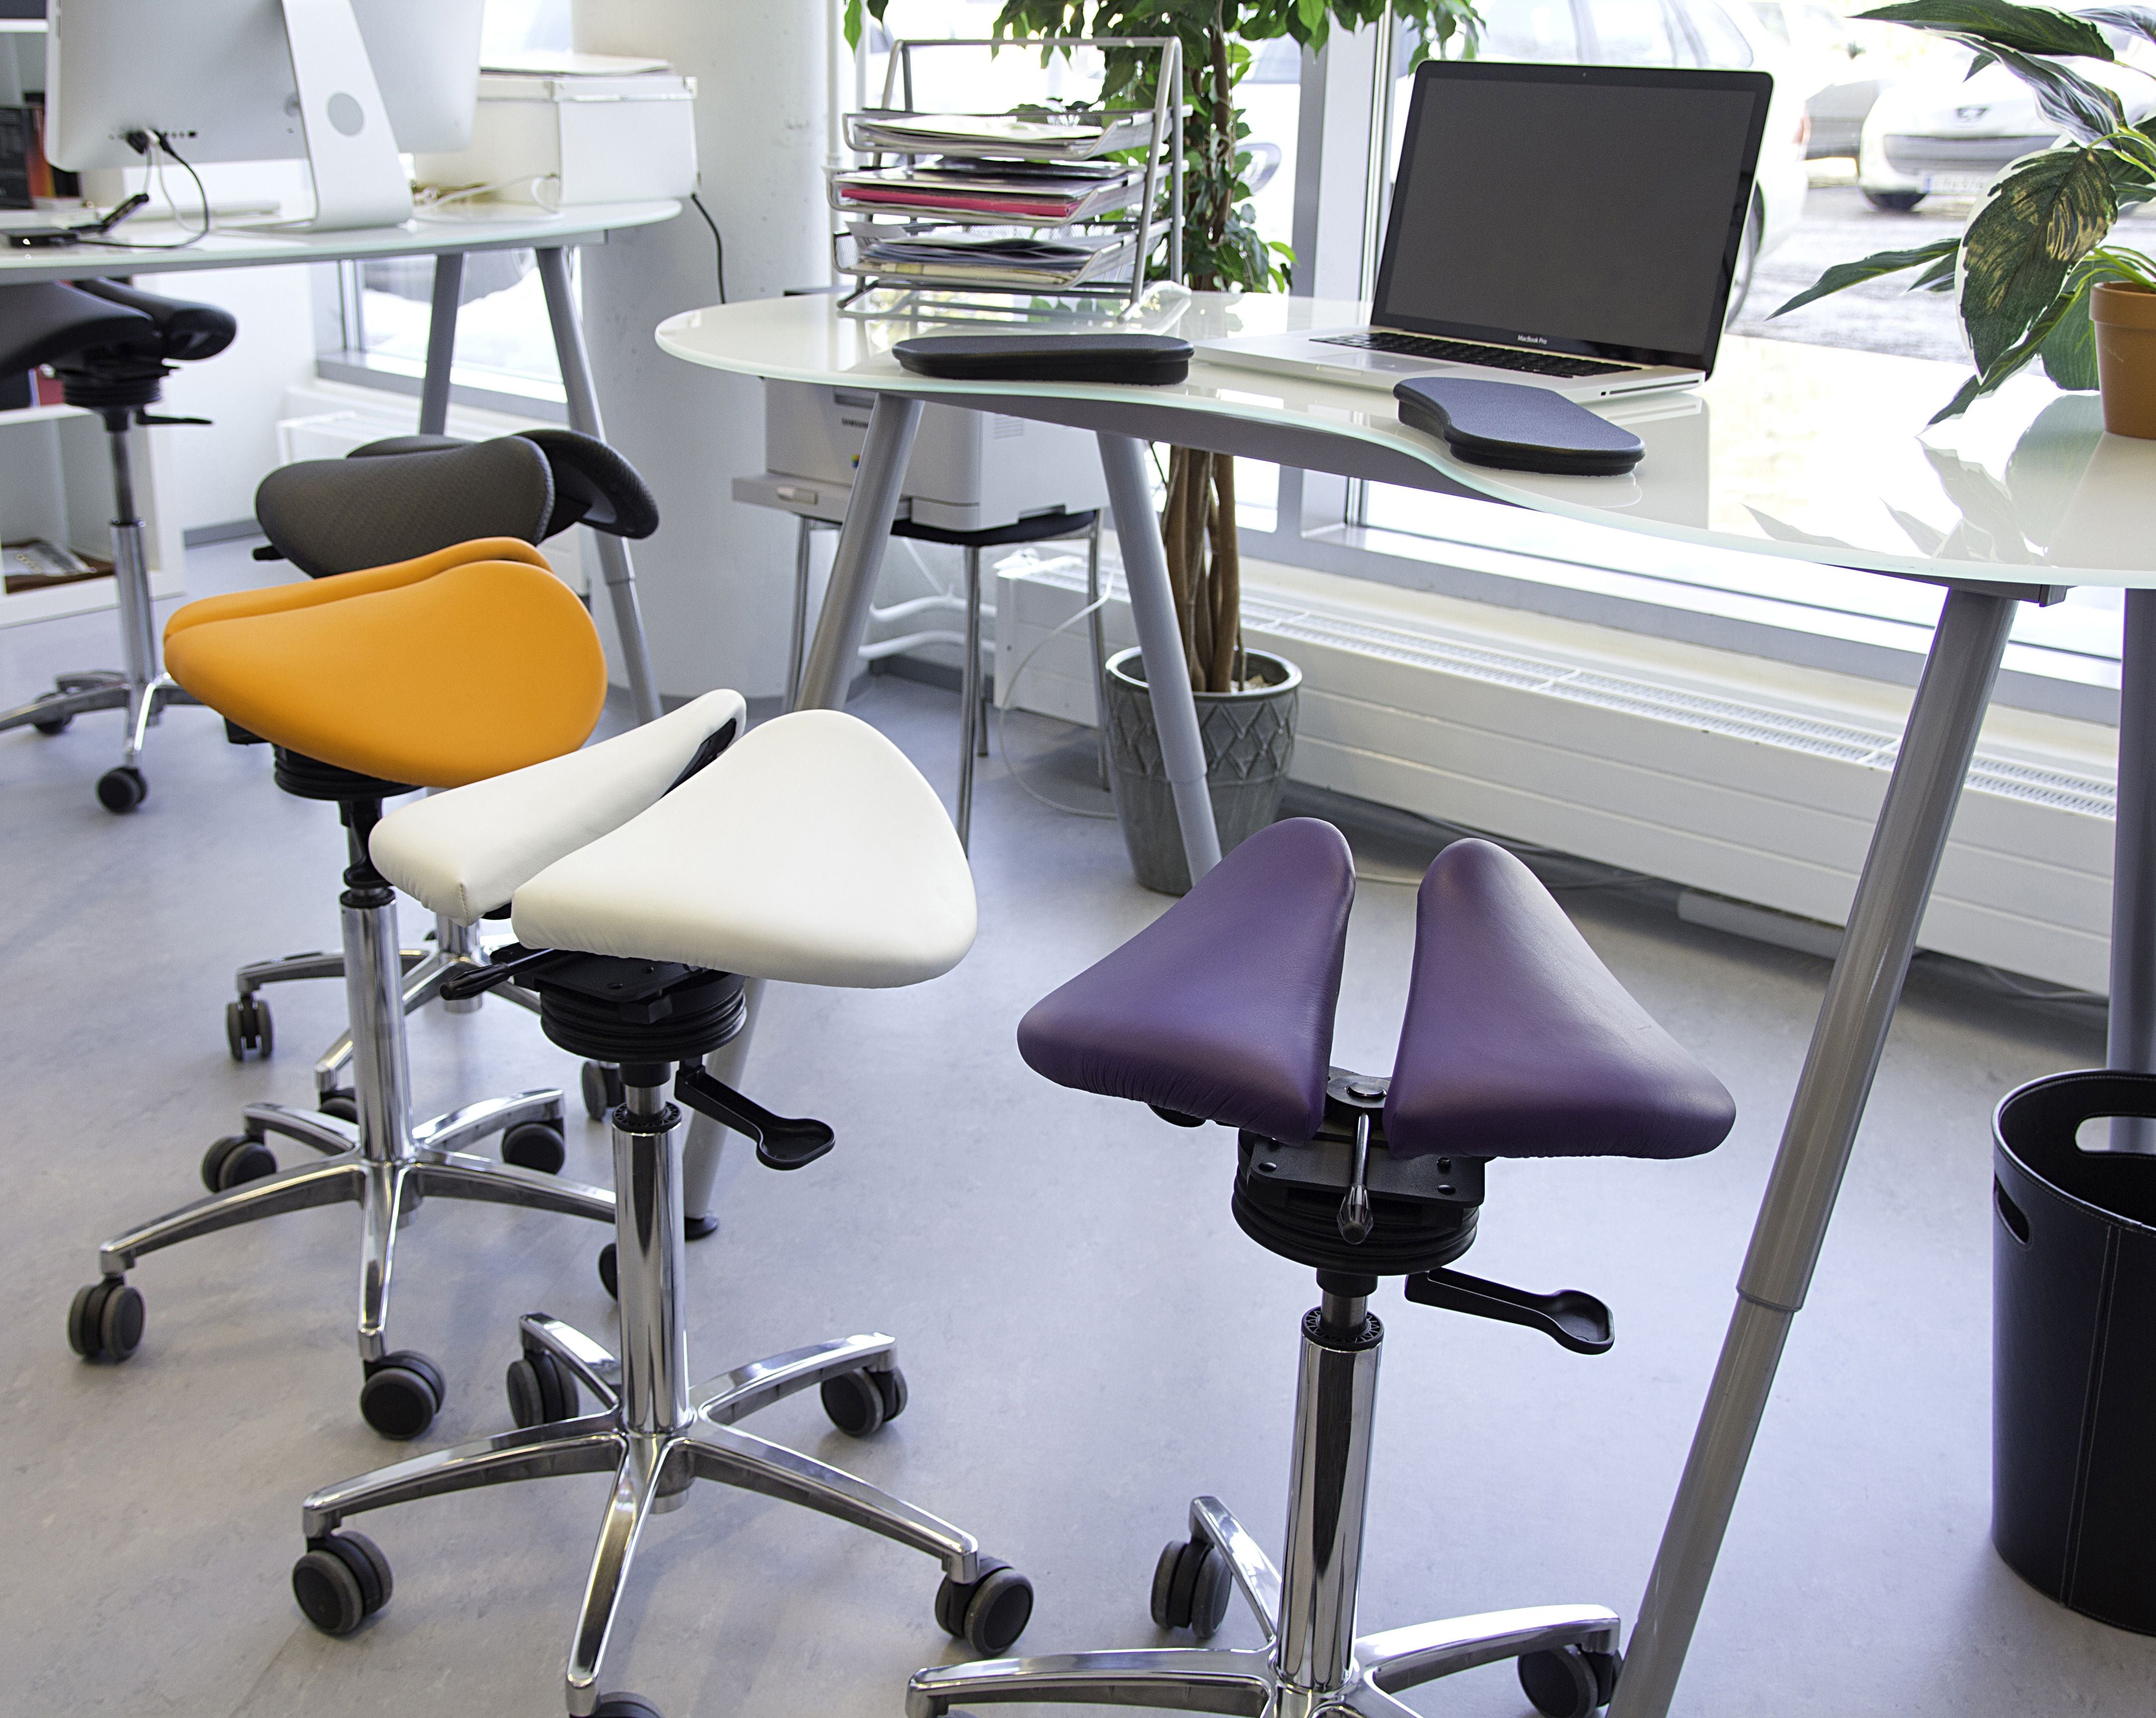 How to Choose the Right Saddle Chair for Your Office | Sit Healthier